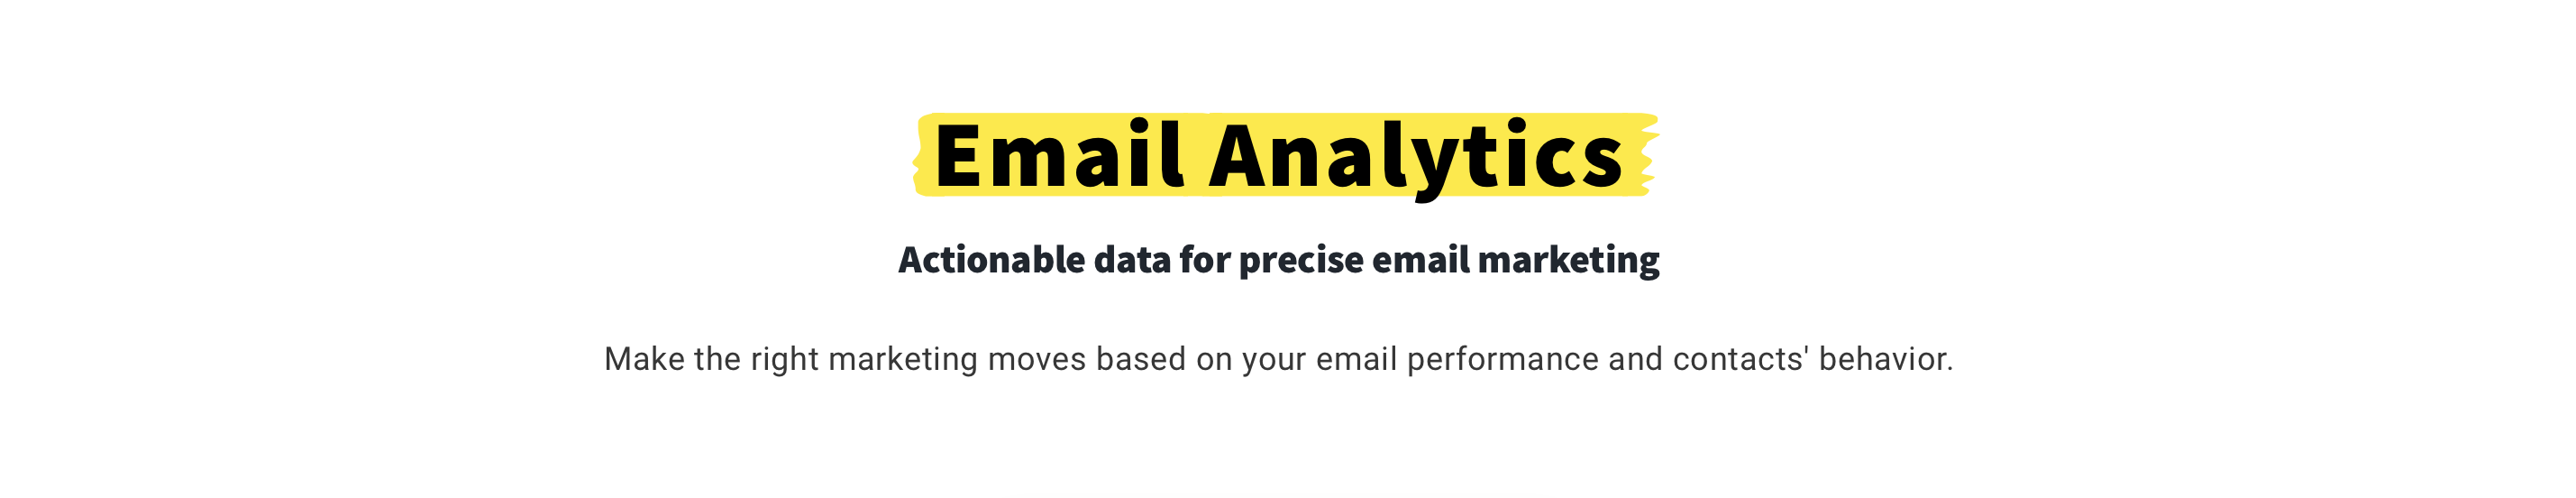 GetResponse Email Analytics Feature